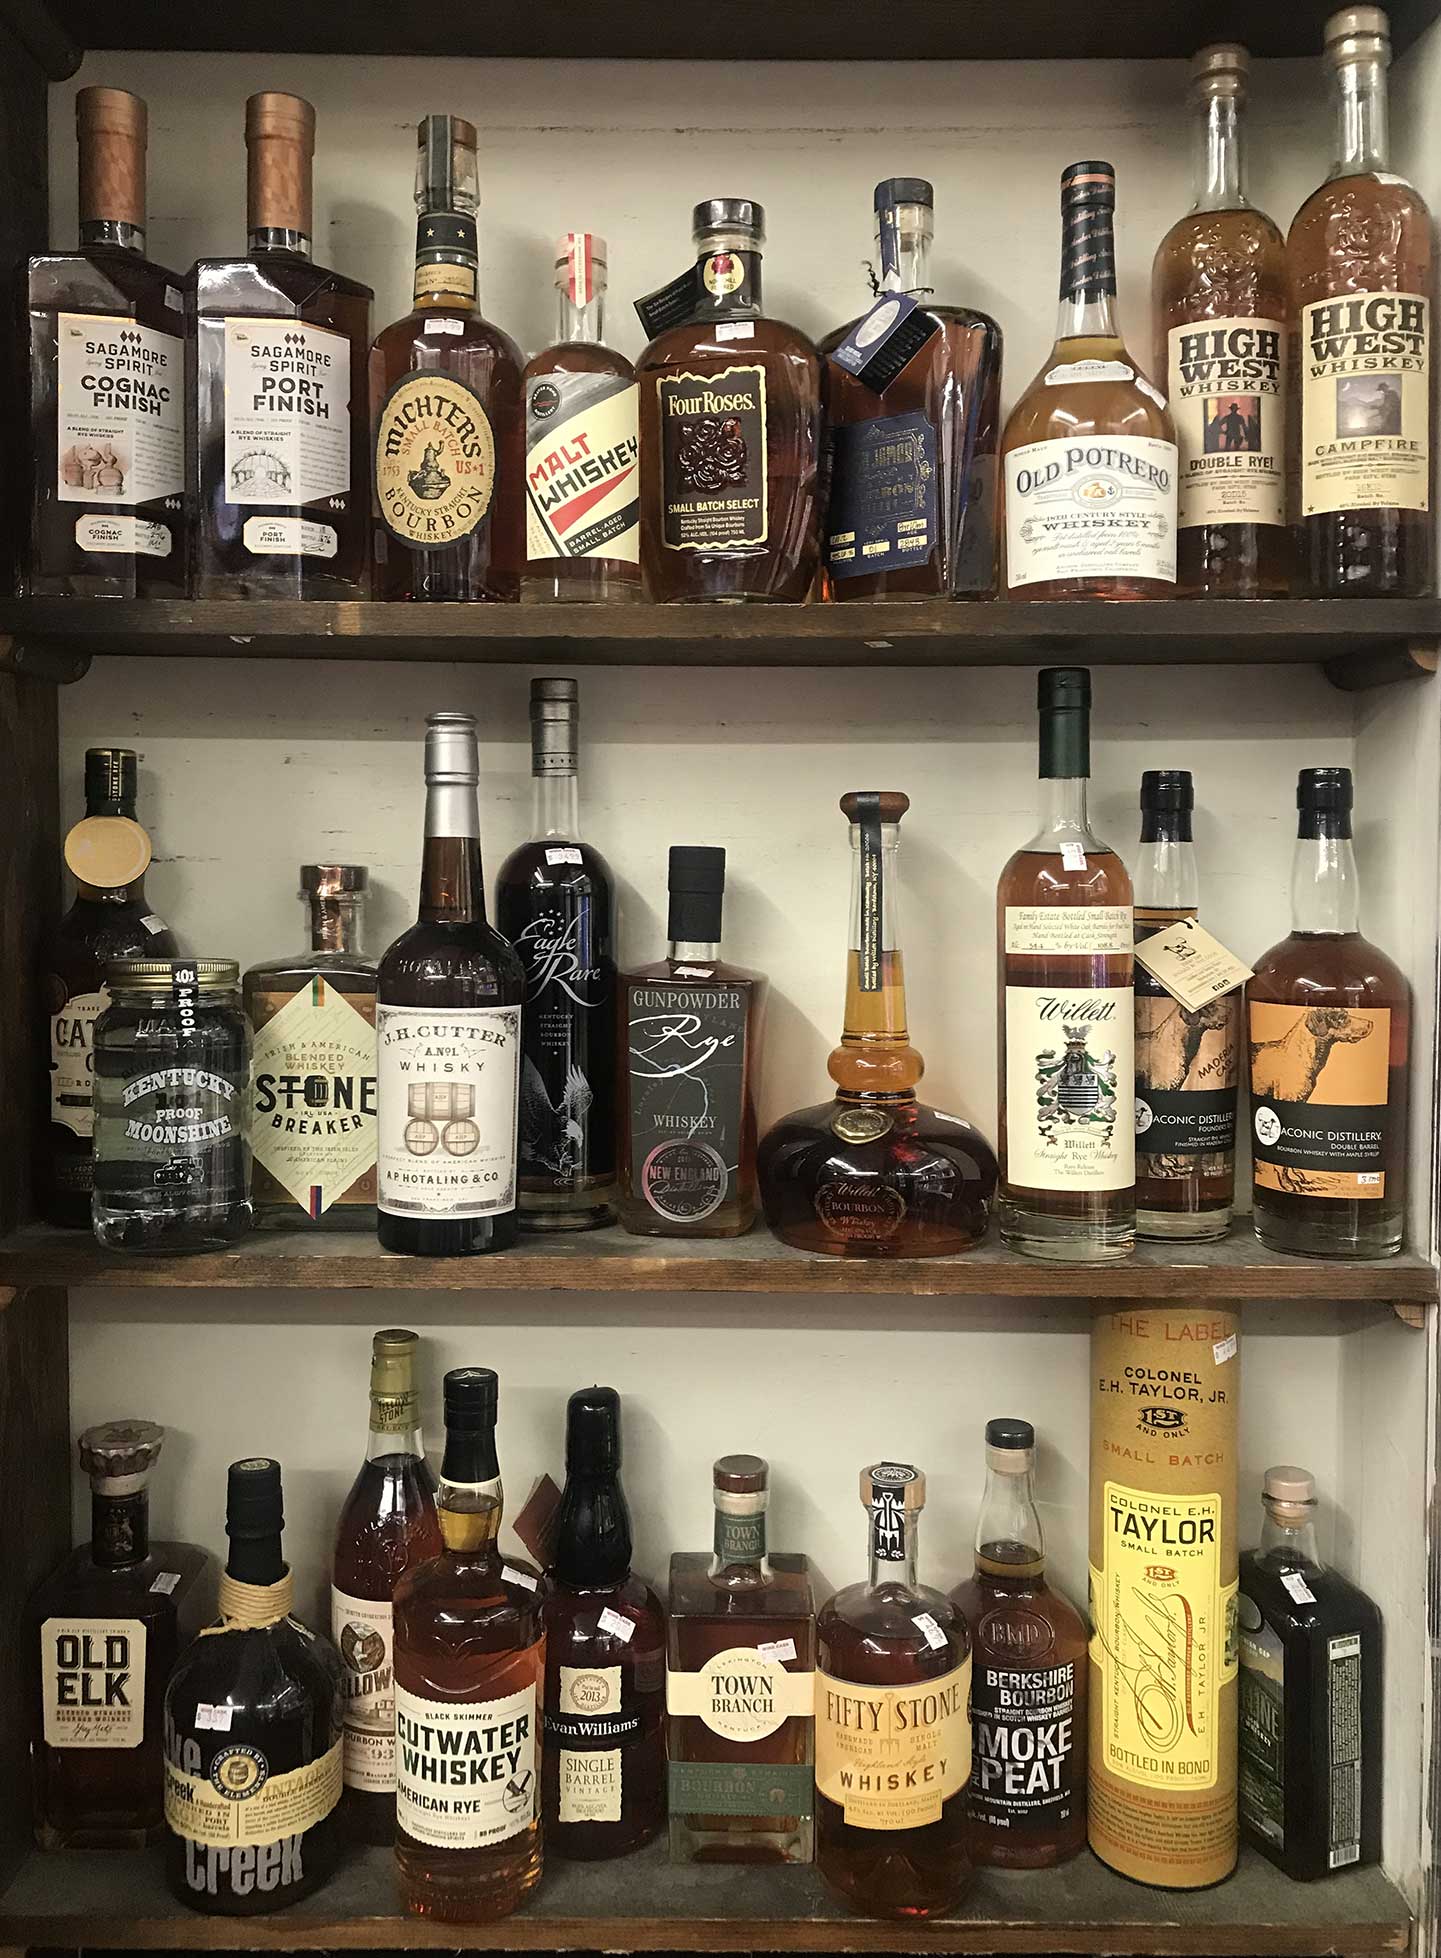 Malt and other specialty whiskies